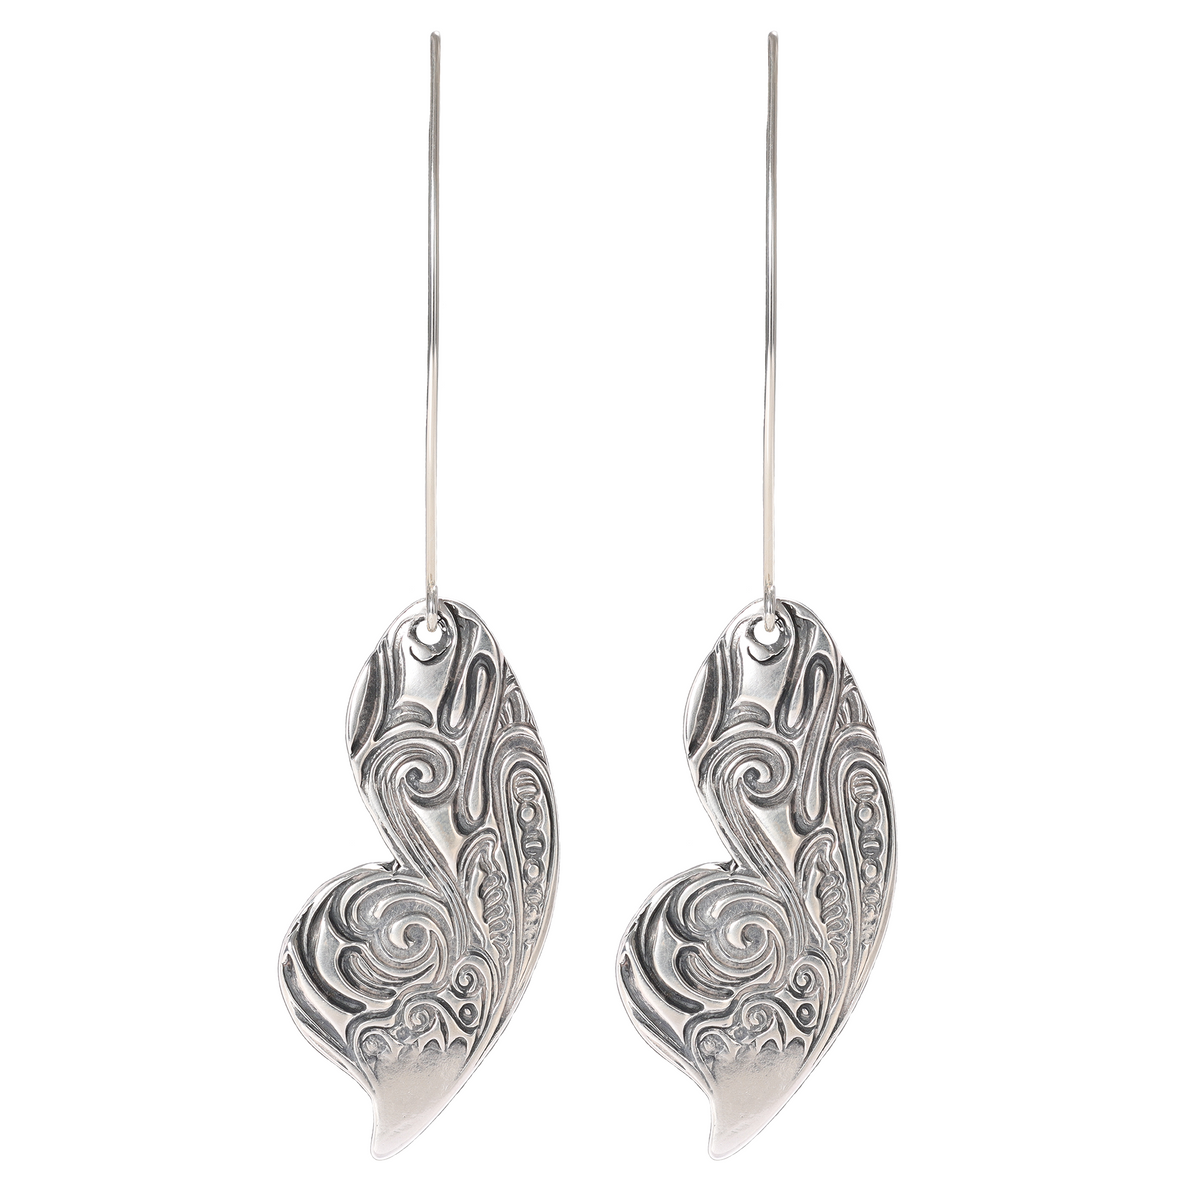 Butterfly Wing Textured Large Sterling Silver Earrings on Long Ear Wires